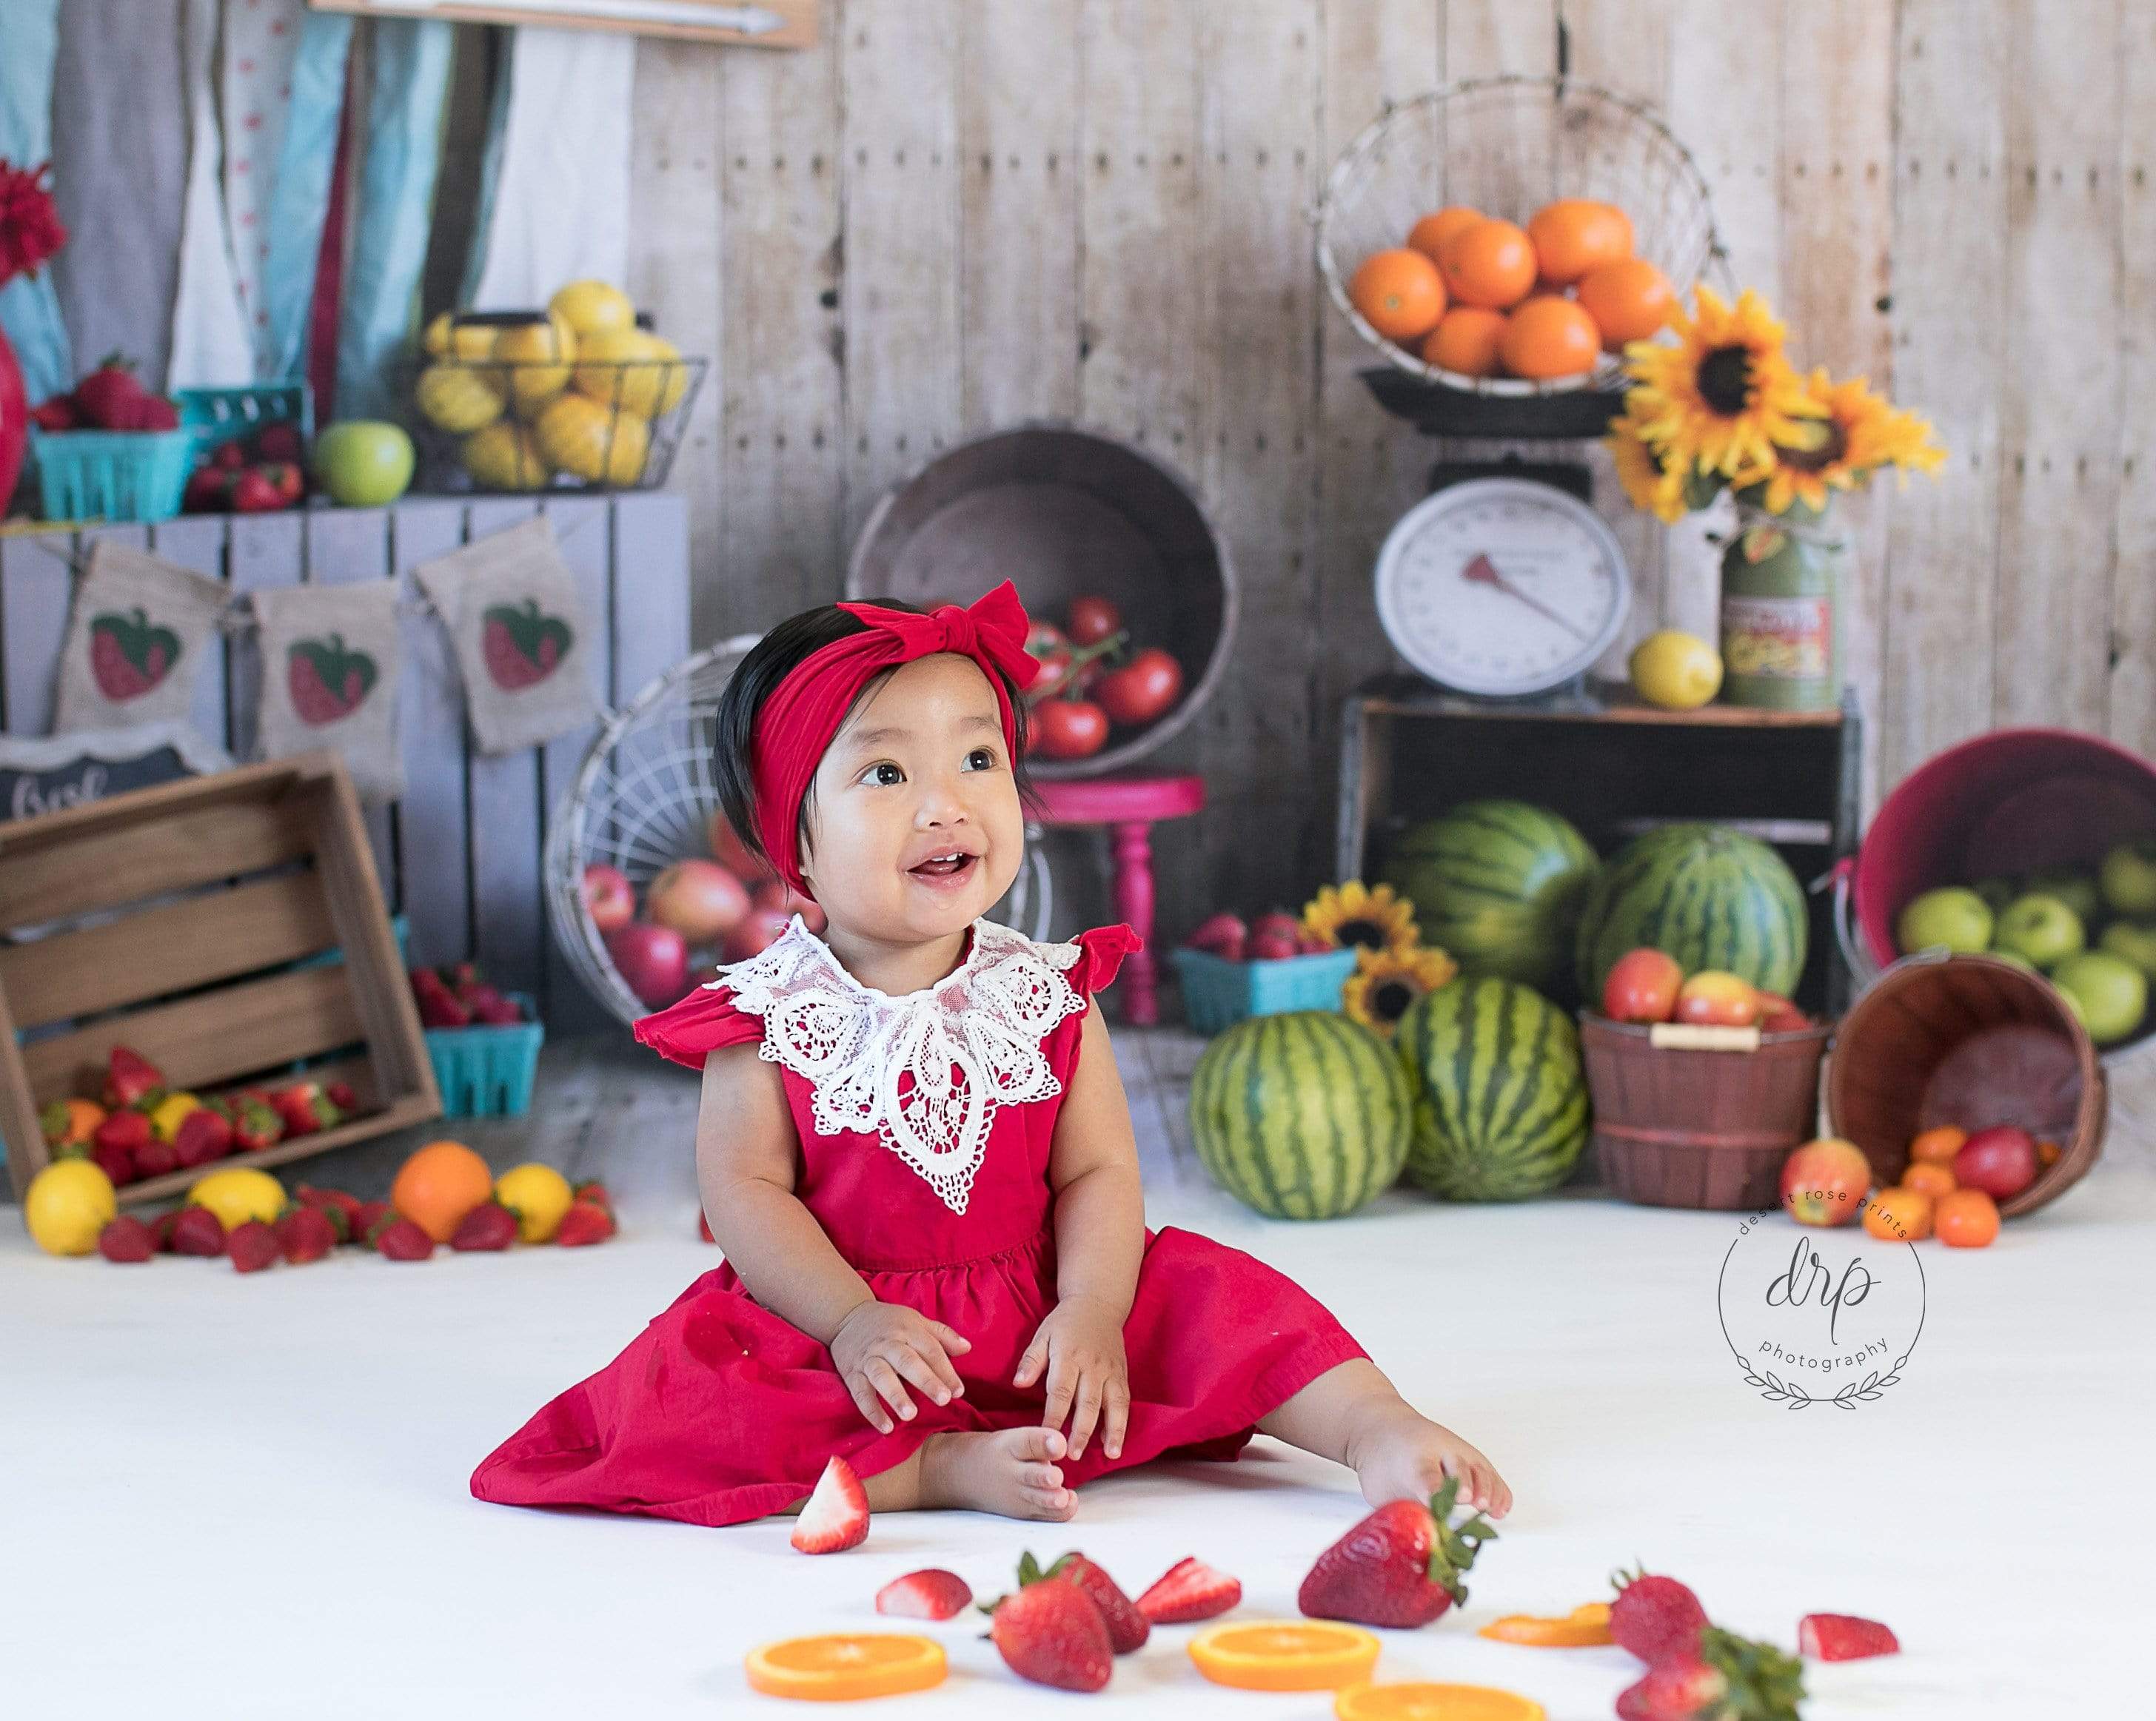 Kate Summer Farmers Market Backdrop for Photography Designed by Danette Kay Photography